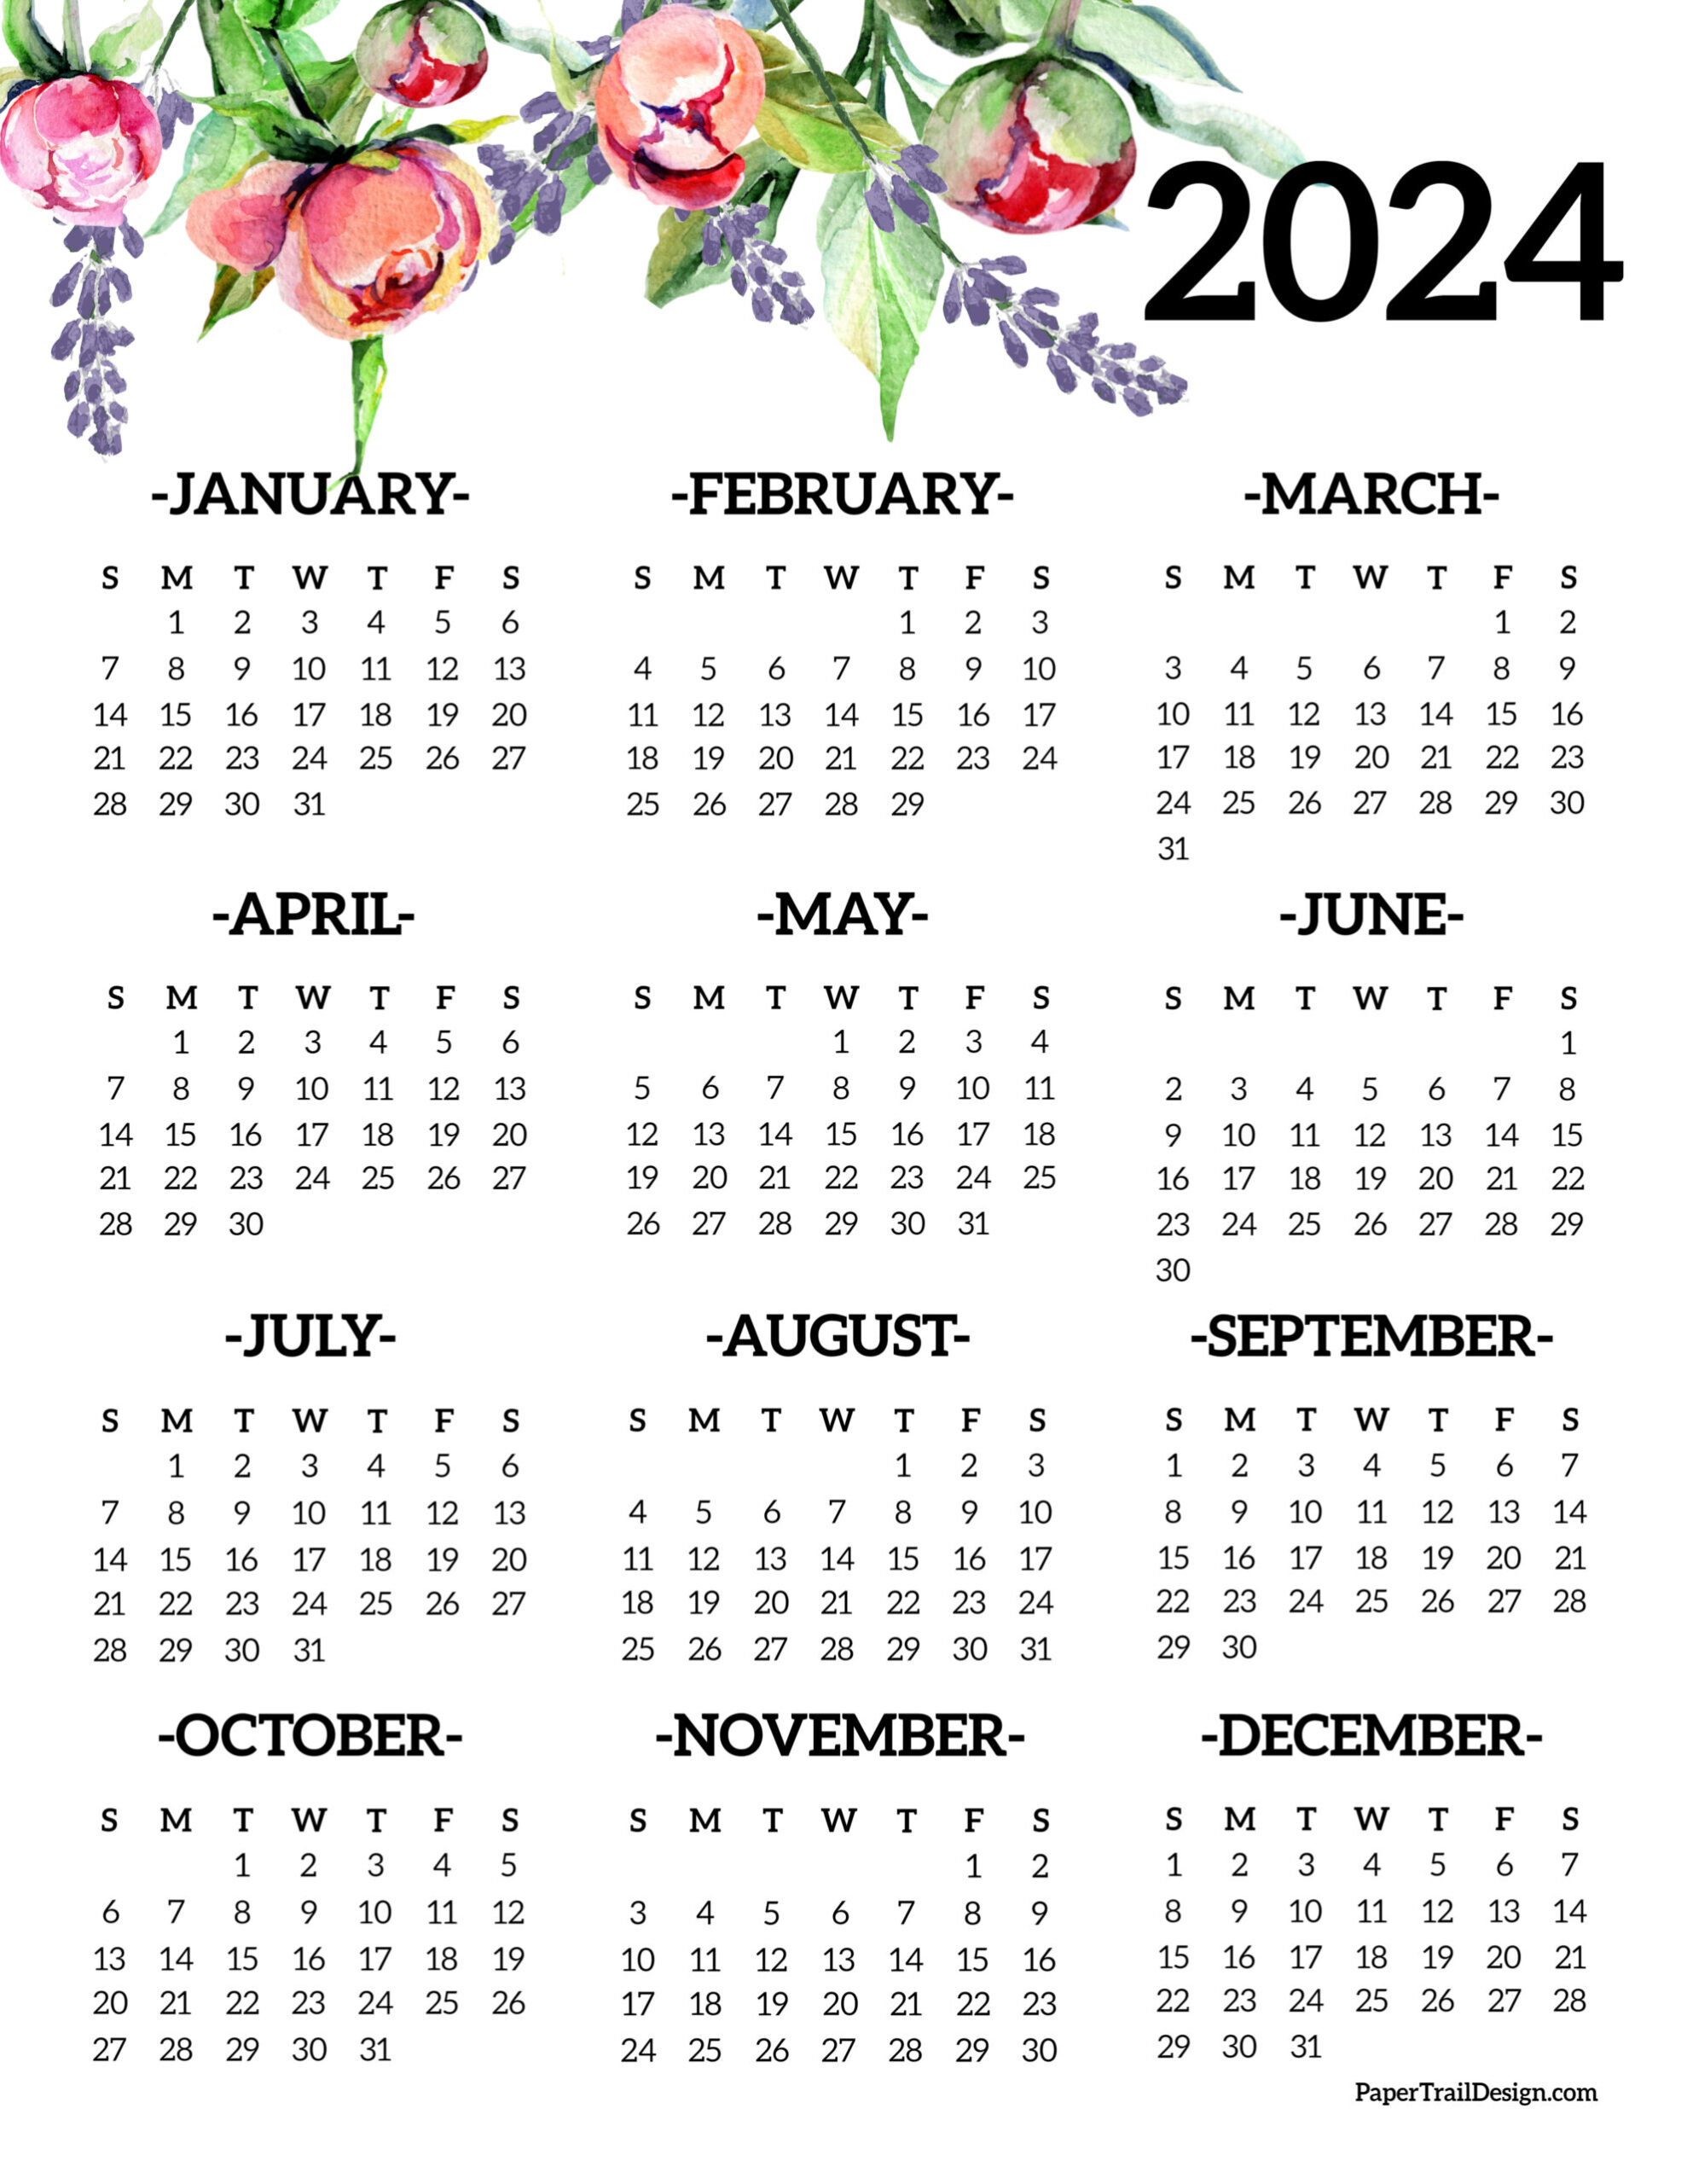 Calendar 2024 Printable One Page - Paper Trail Design for 2024 One Page Calendar Free Printable